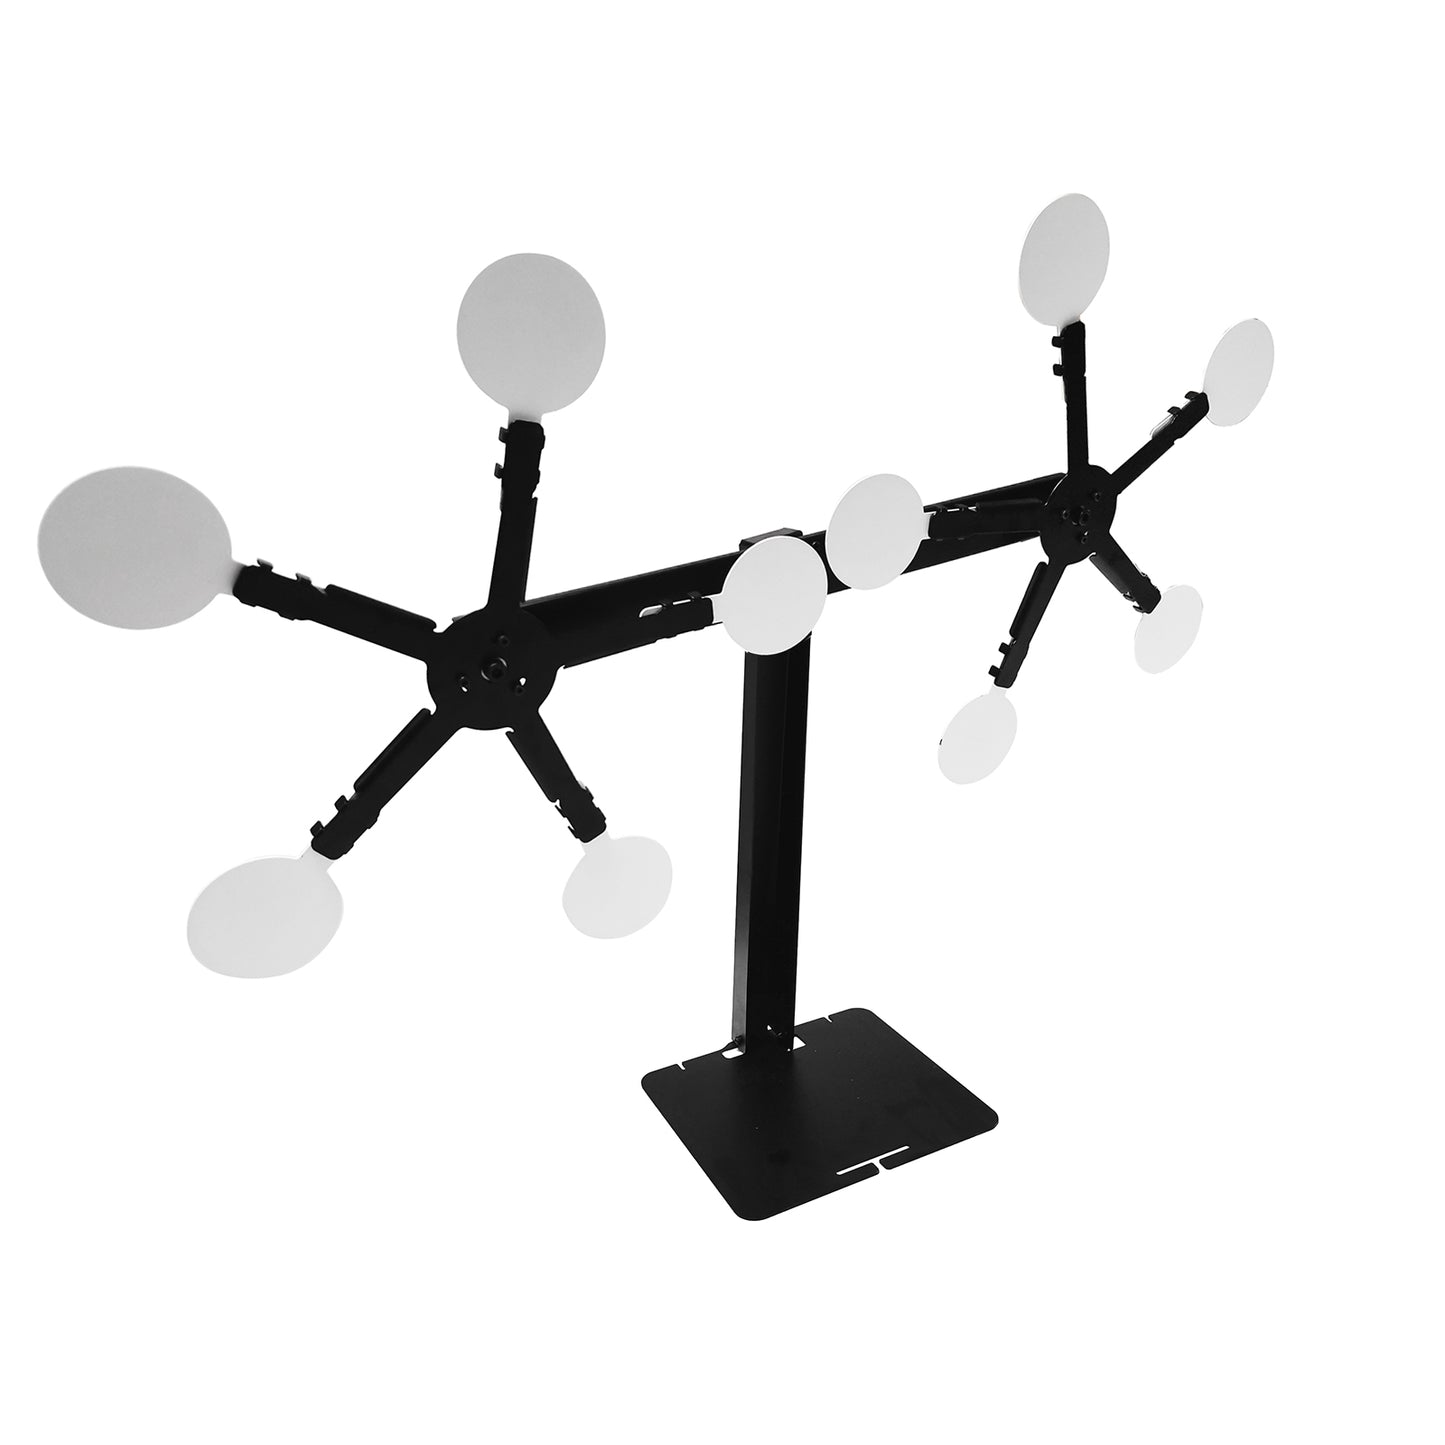 ATFLBOX Resetting and Rotate The Metal Shooting Target Stand with 10 Steel Plates for Pistol Airsoft BB Guns (Double Star Plus)